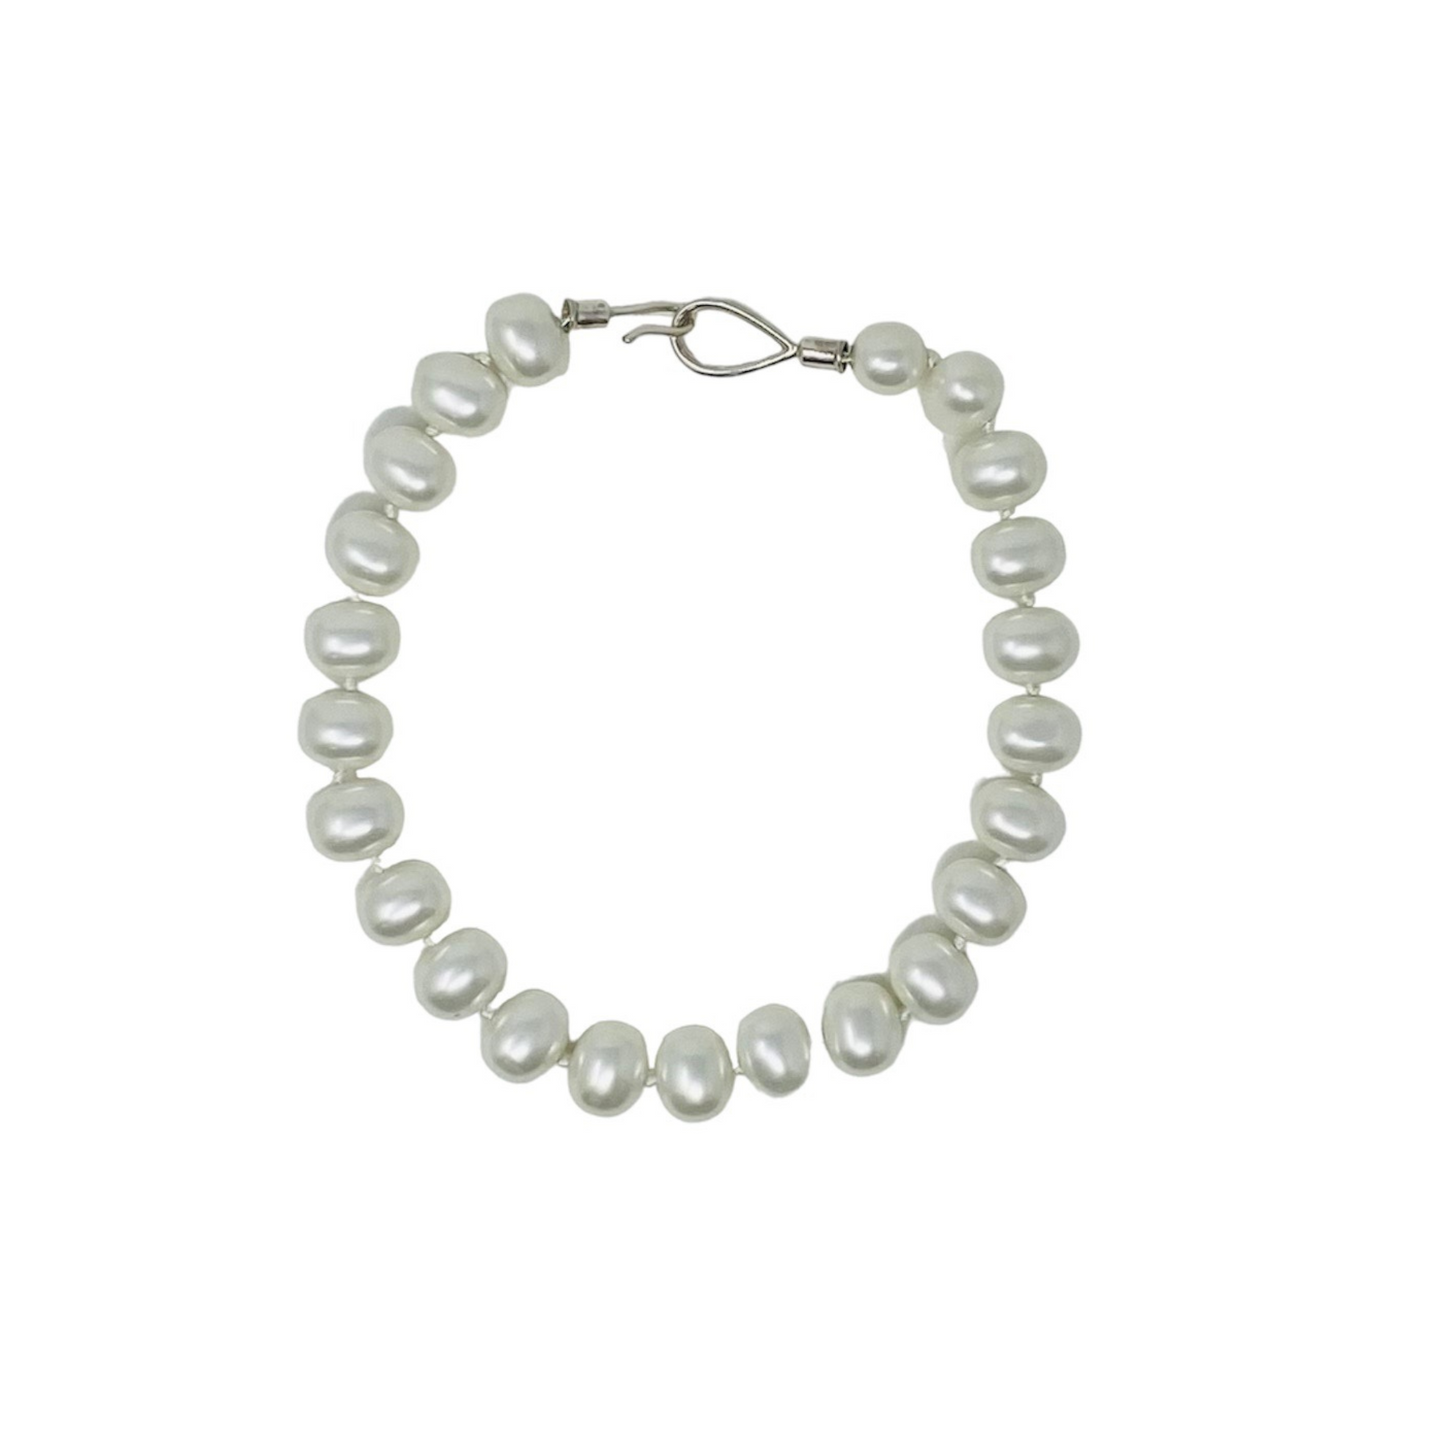 Catherine Canino Pearl Necklace with Silver Clasp